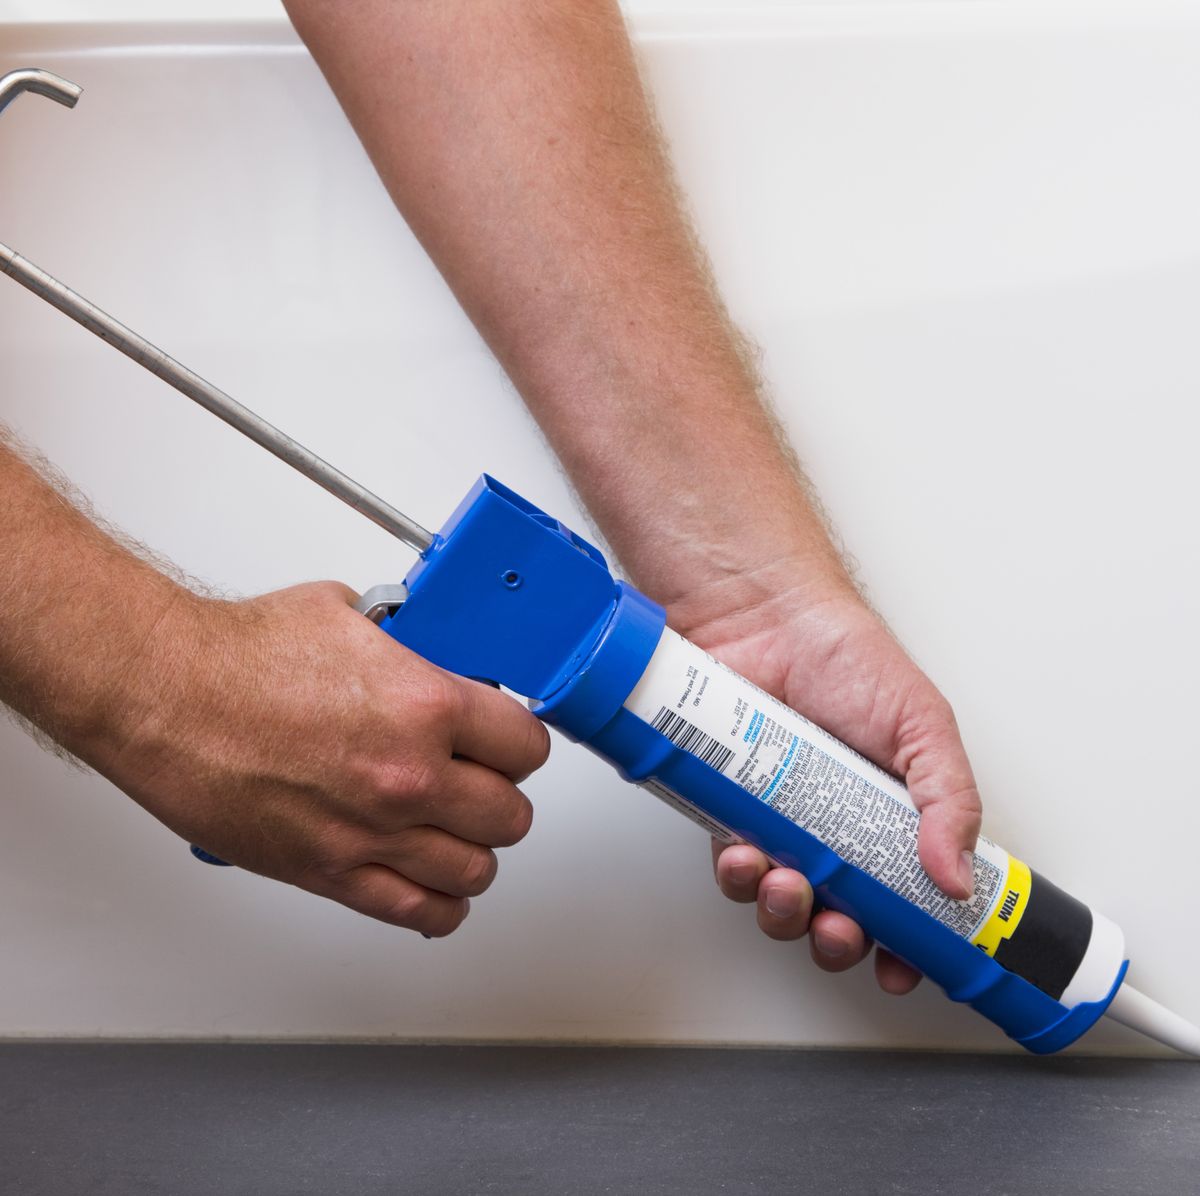 How To Remove Silicone Caulk - The Best Tricks